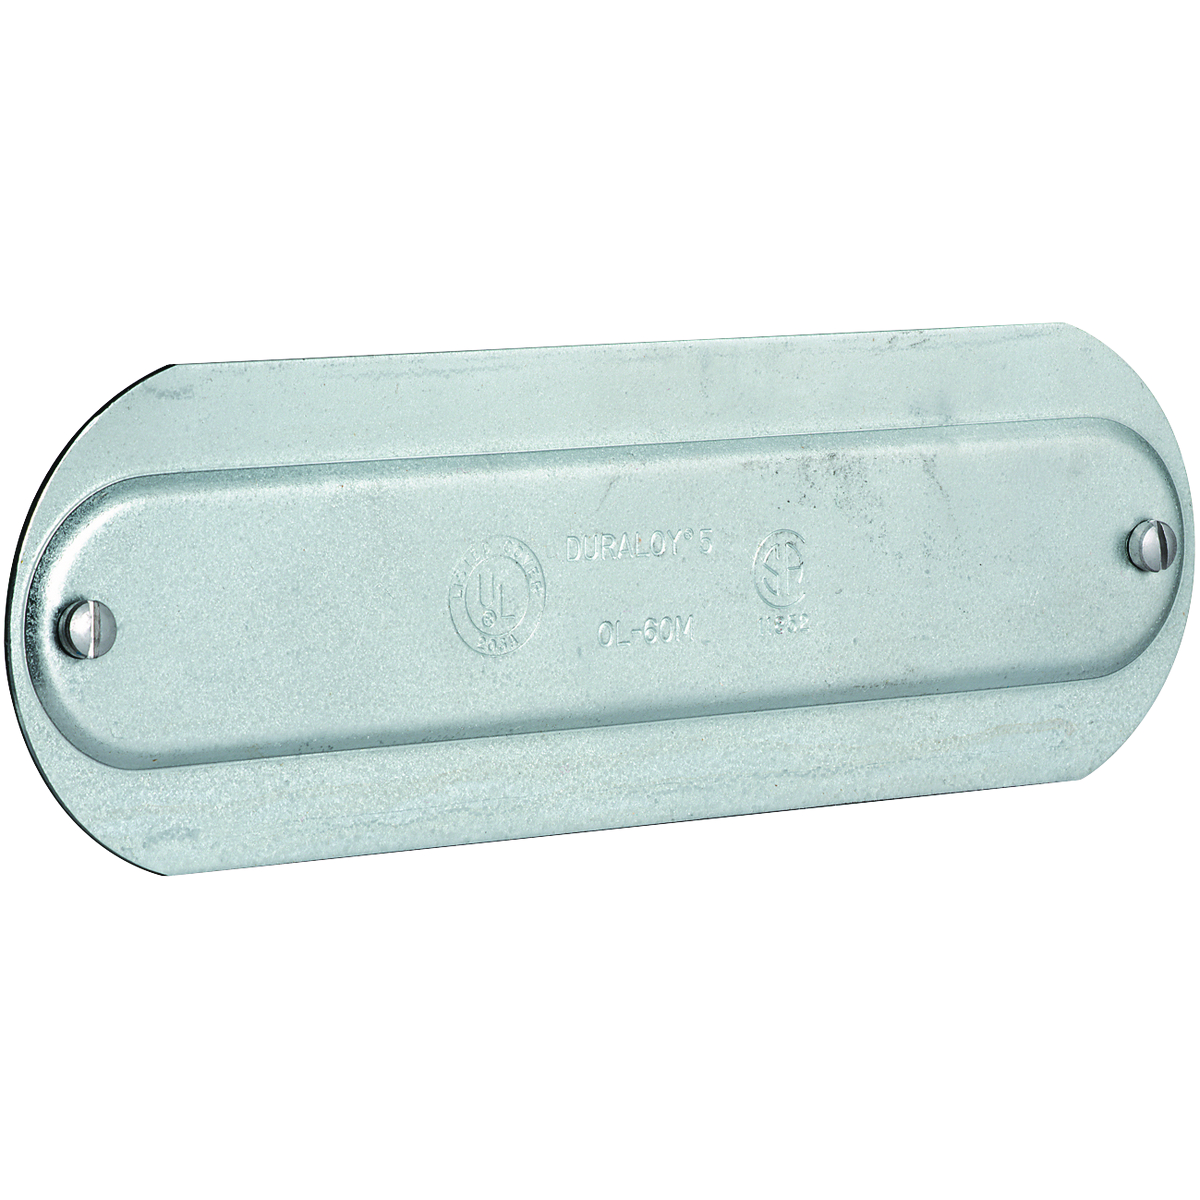 O SERIES/DURALOY 5 SERIES - STEEL STAMPED CONDUIT BODY COVER - HUB SIZE2-1/2 INCH